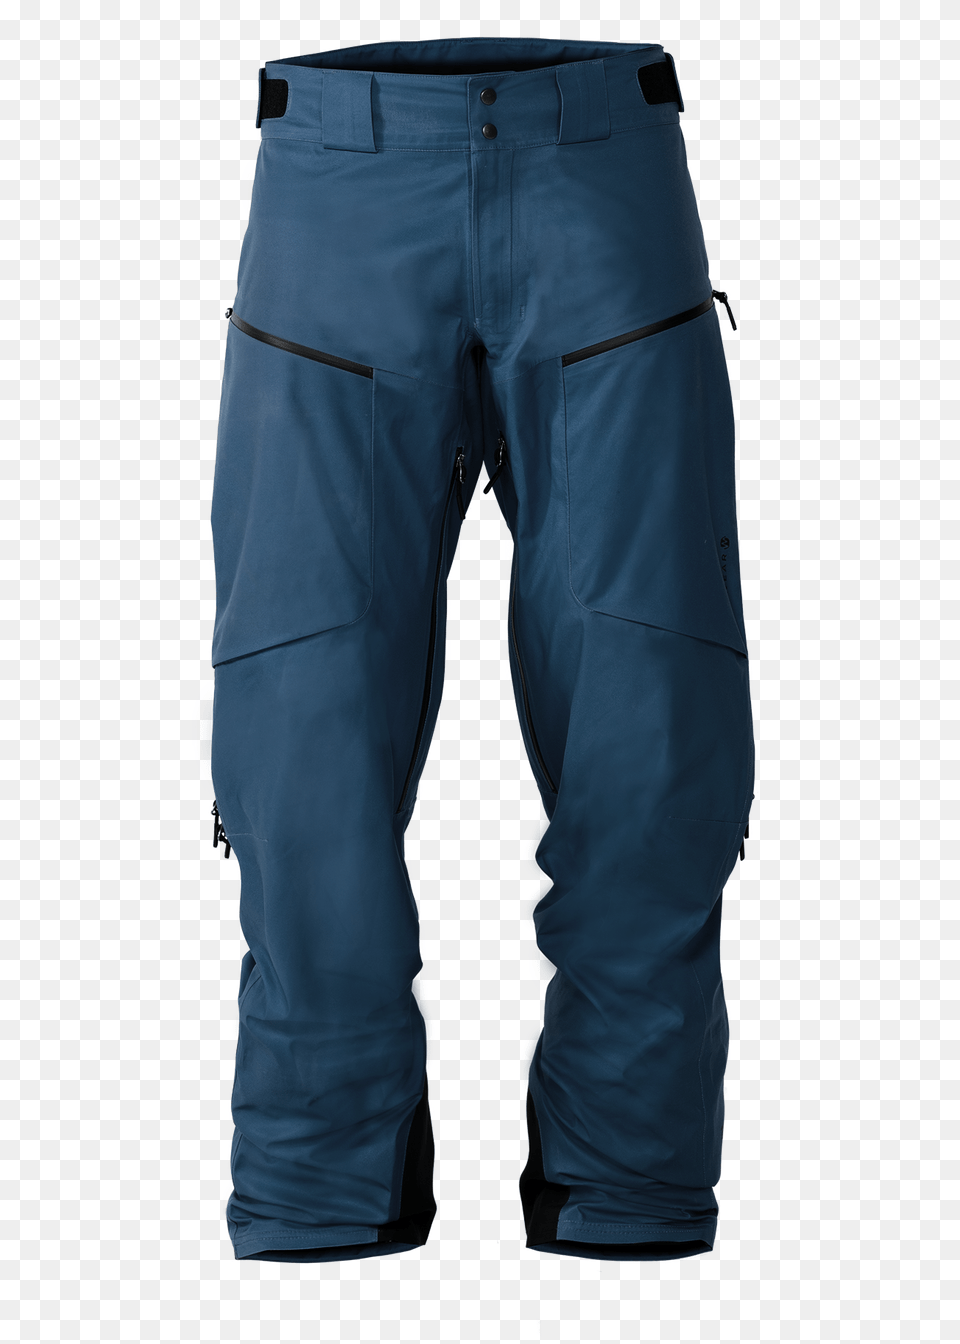 Open One, Clothing, Jeans, Pants Png